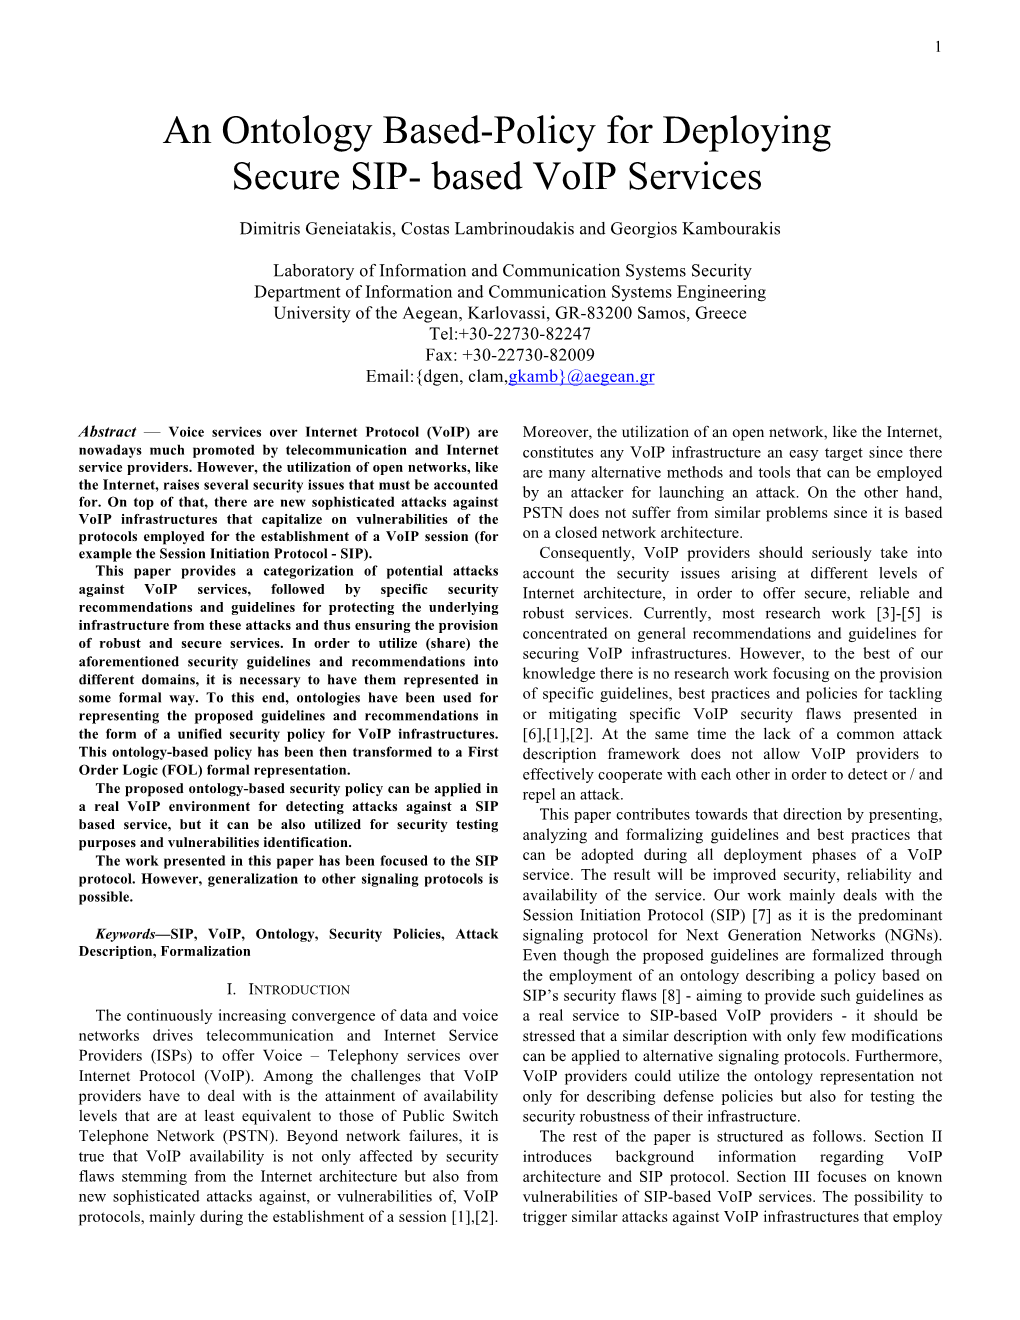 An Ontology Based-Policy for Deploying Secure SIP- Based Voip Services